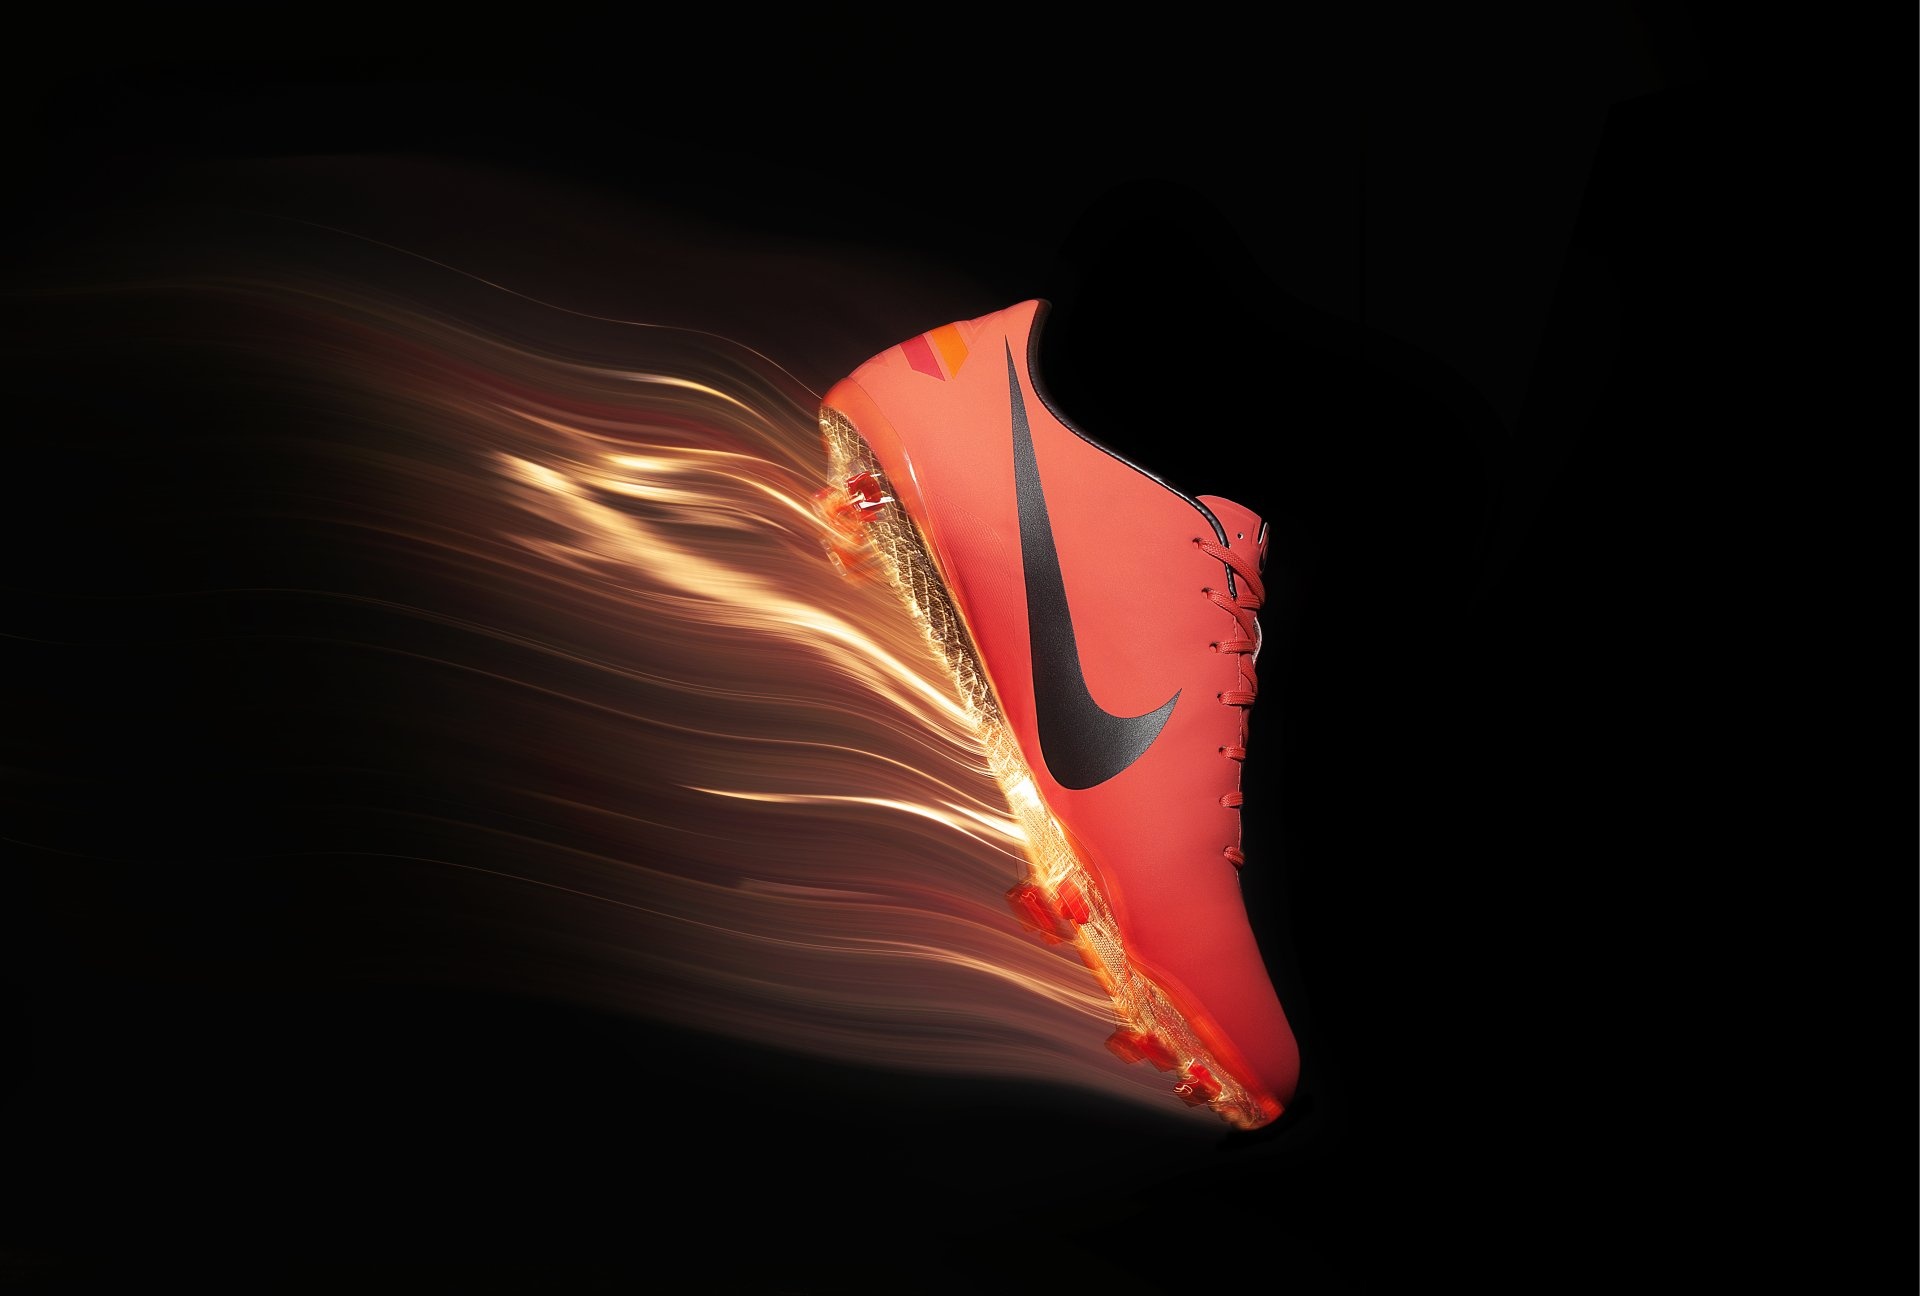 4K Nike wallpapers, Quality backgrounds, Nike brand, High-definition images, 1920x1300 HD Desktop